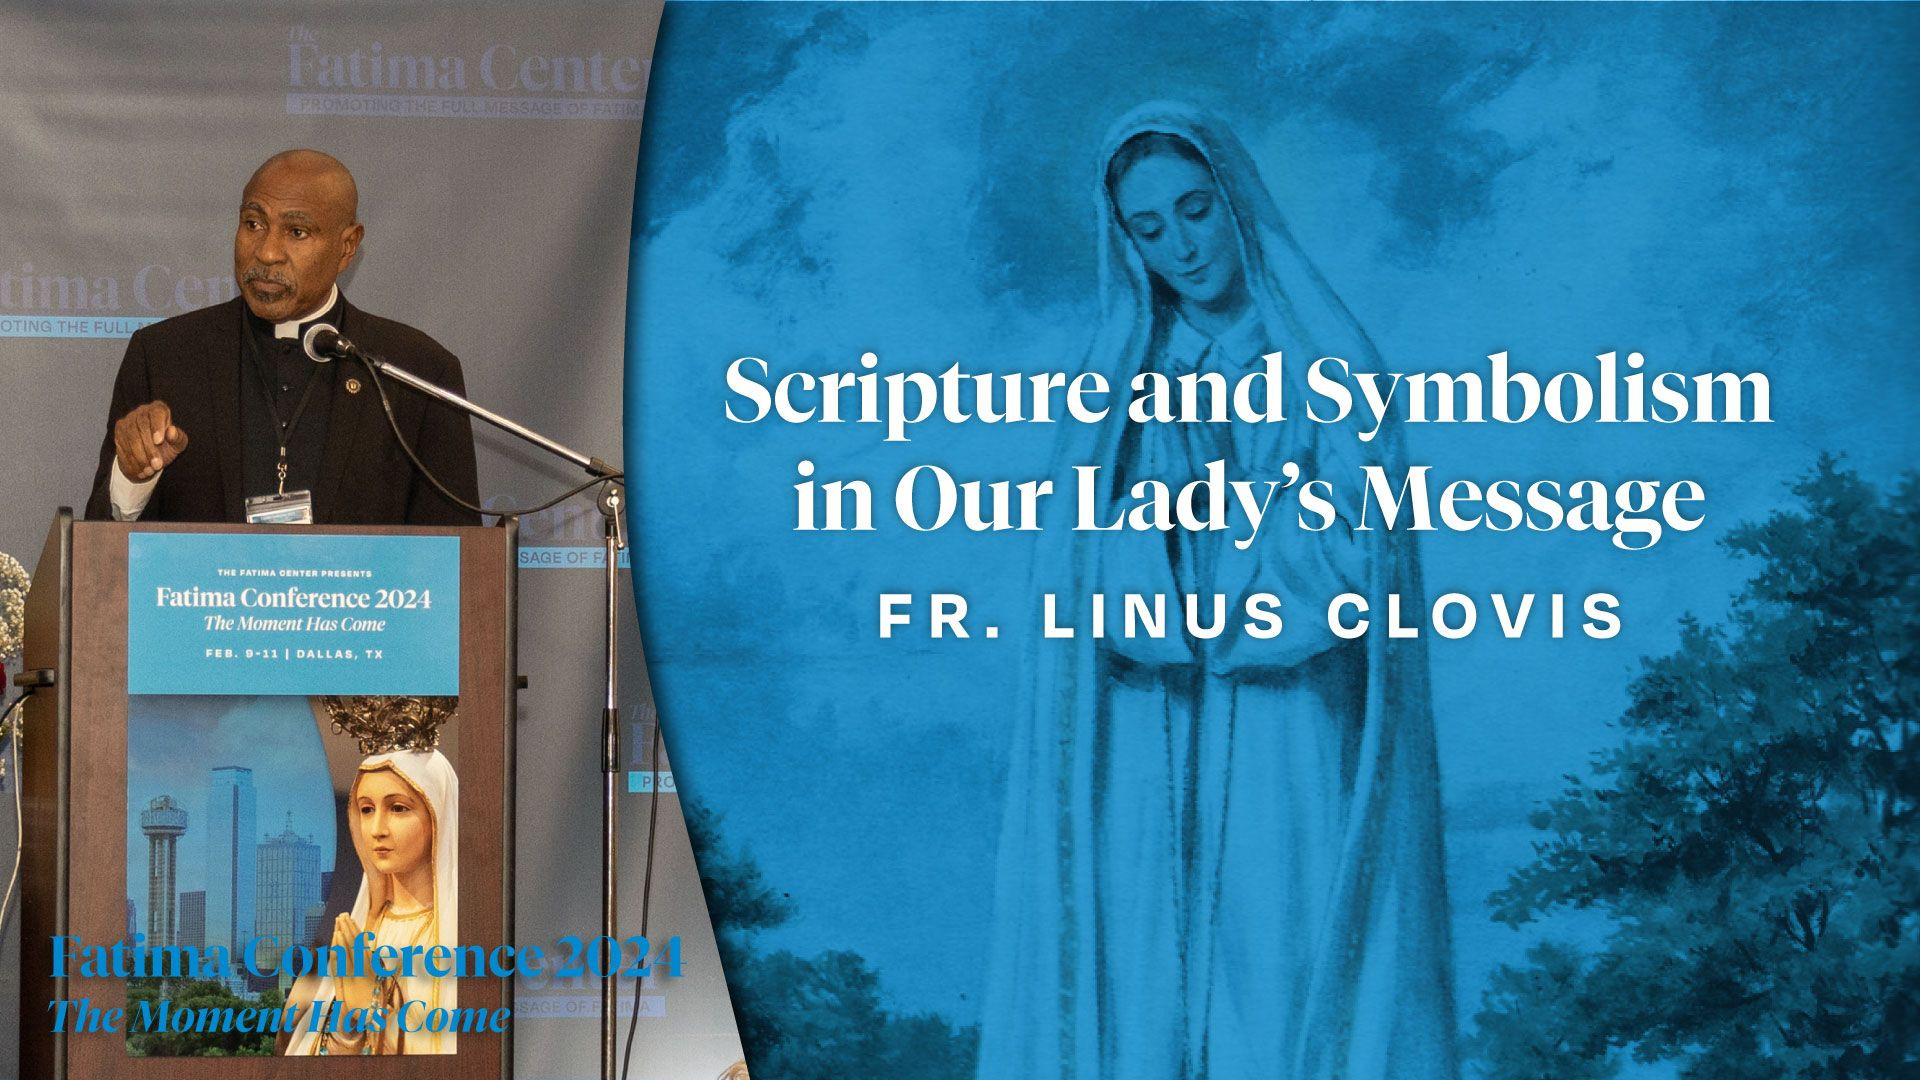 ⁣Scripture and Symbolism in Our Lady's Message by Fr. Linus Clovis | FC24 Dallas, TX